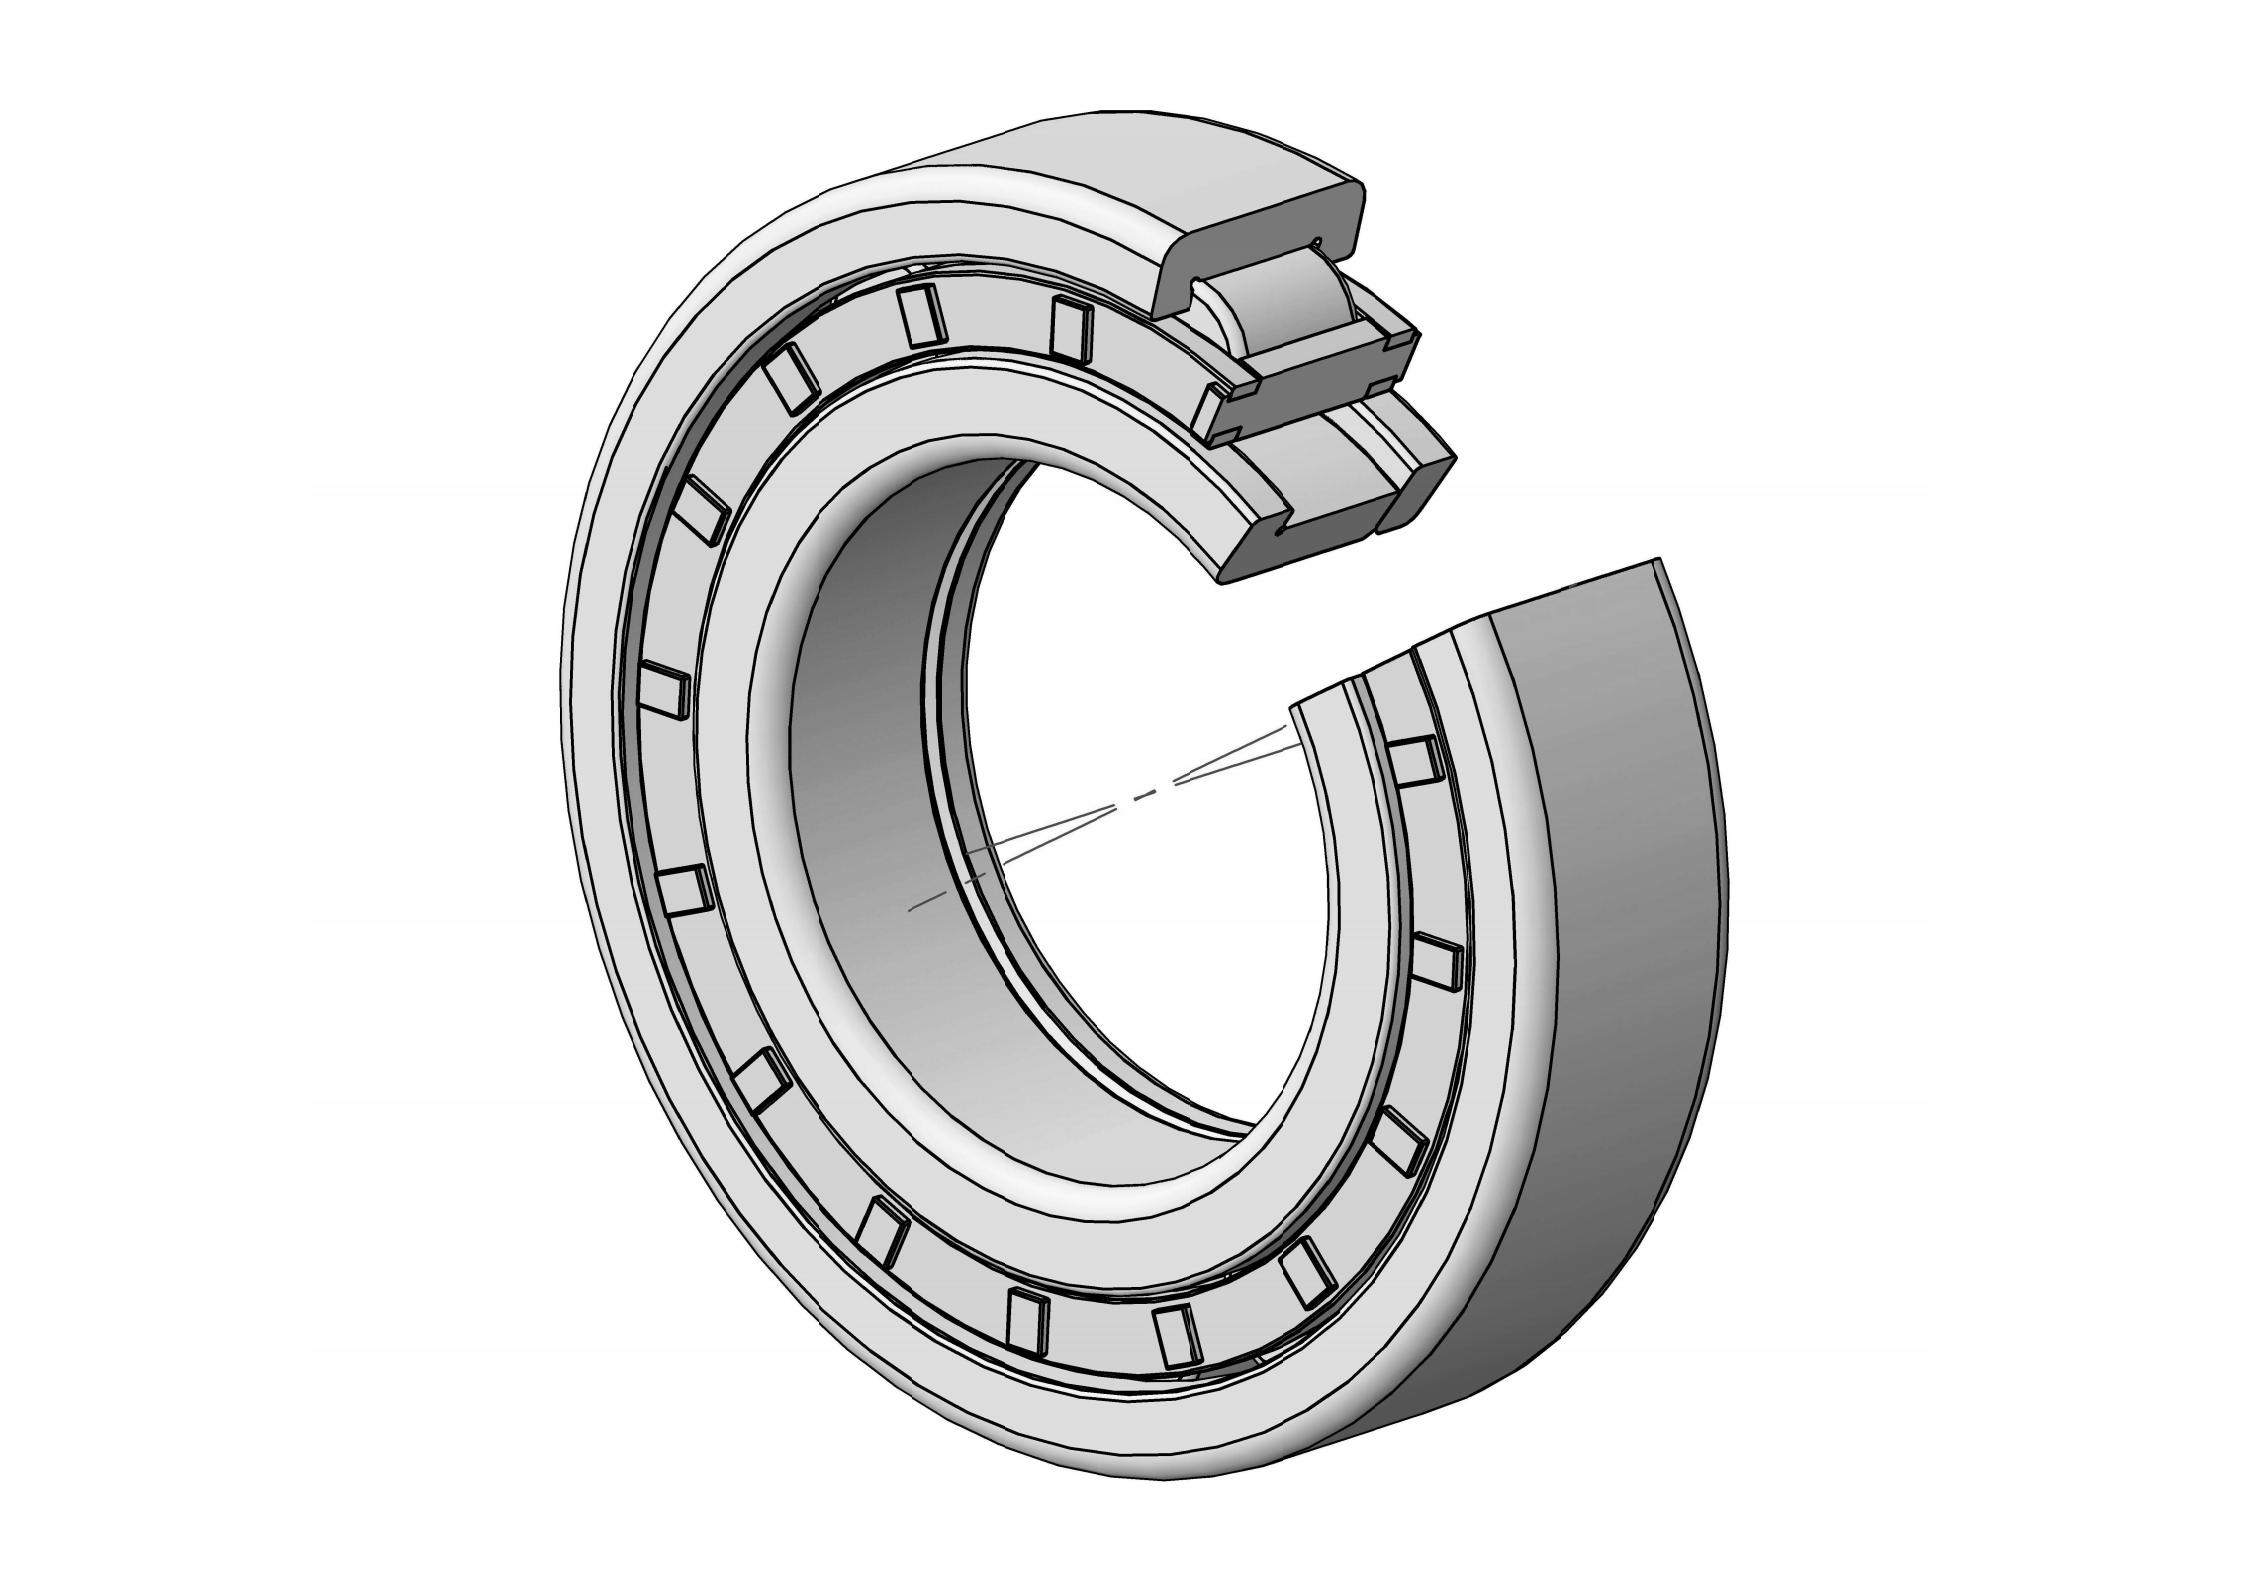 NUP2311-E Single Row Cylindrical roller bearing 